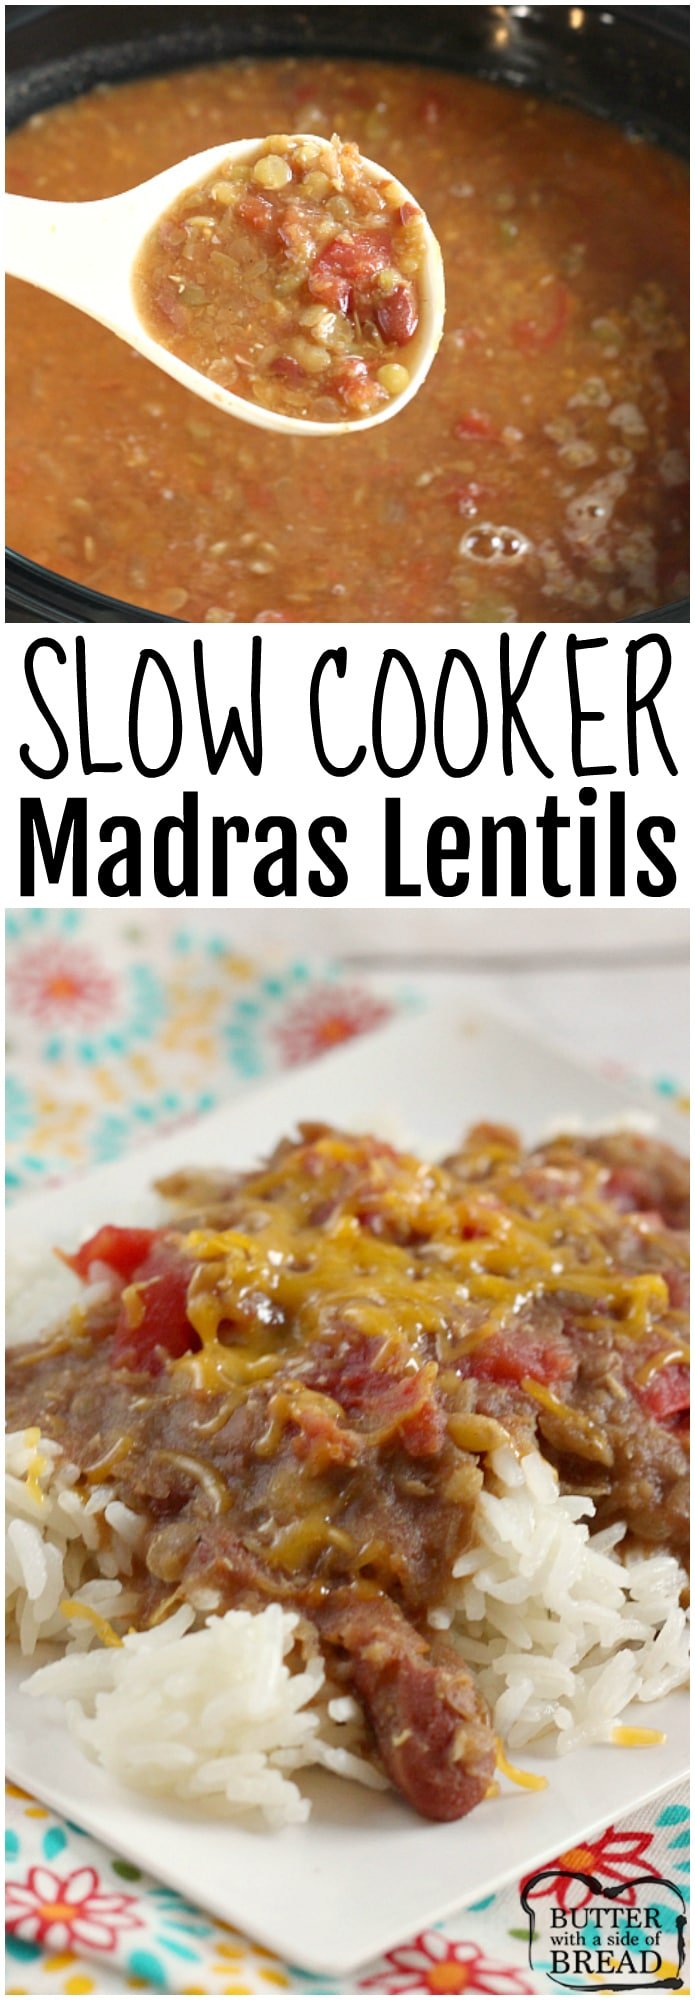 Slow Cooker Madras Lentils are full of red beans, lentils, tomatoes and can be served over rice for a delicious, healthy, vegetarian dinner the whole family will enjoy!